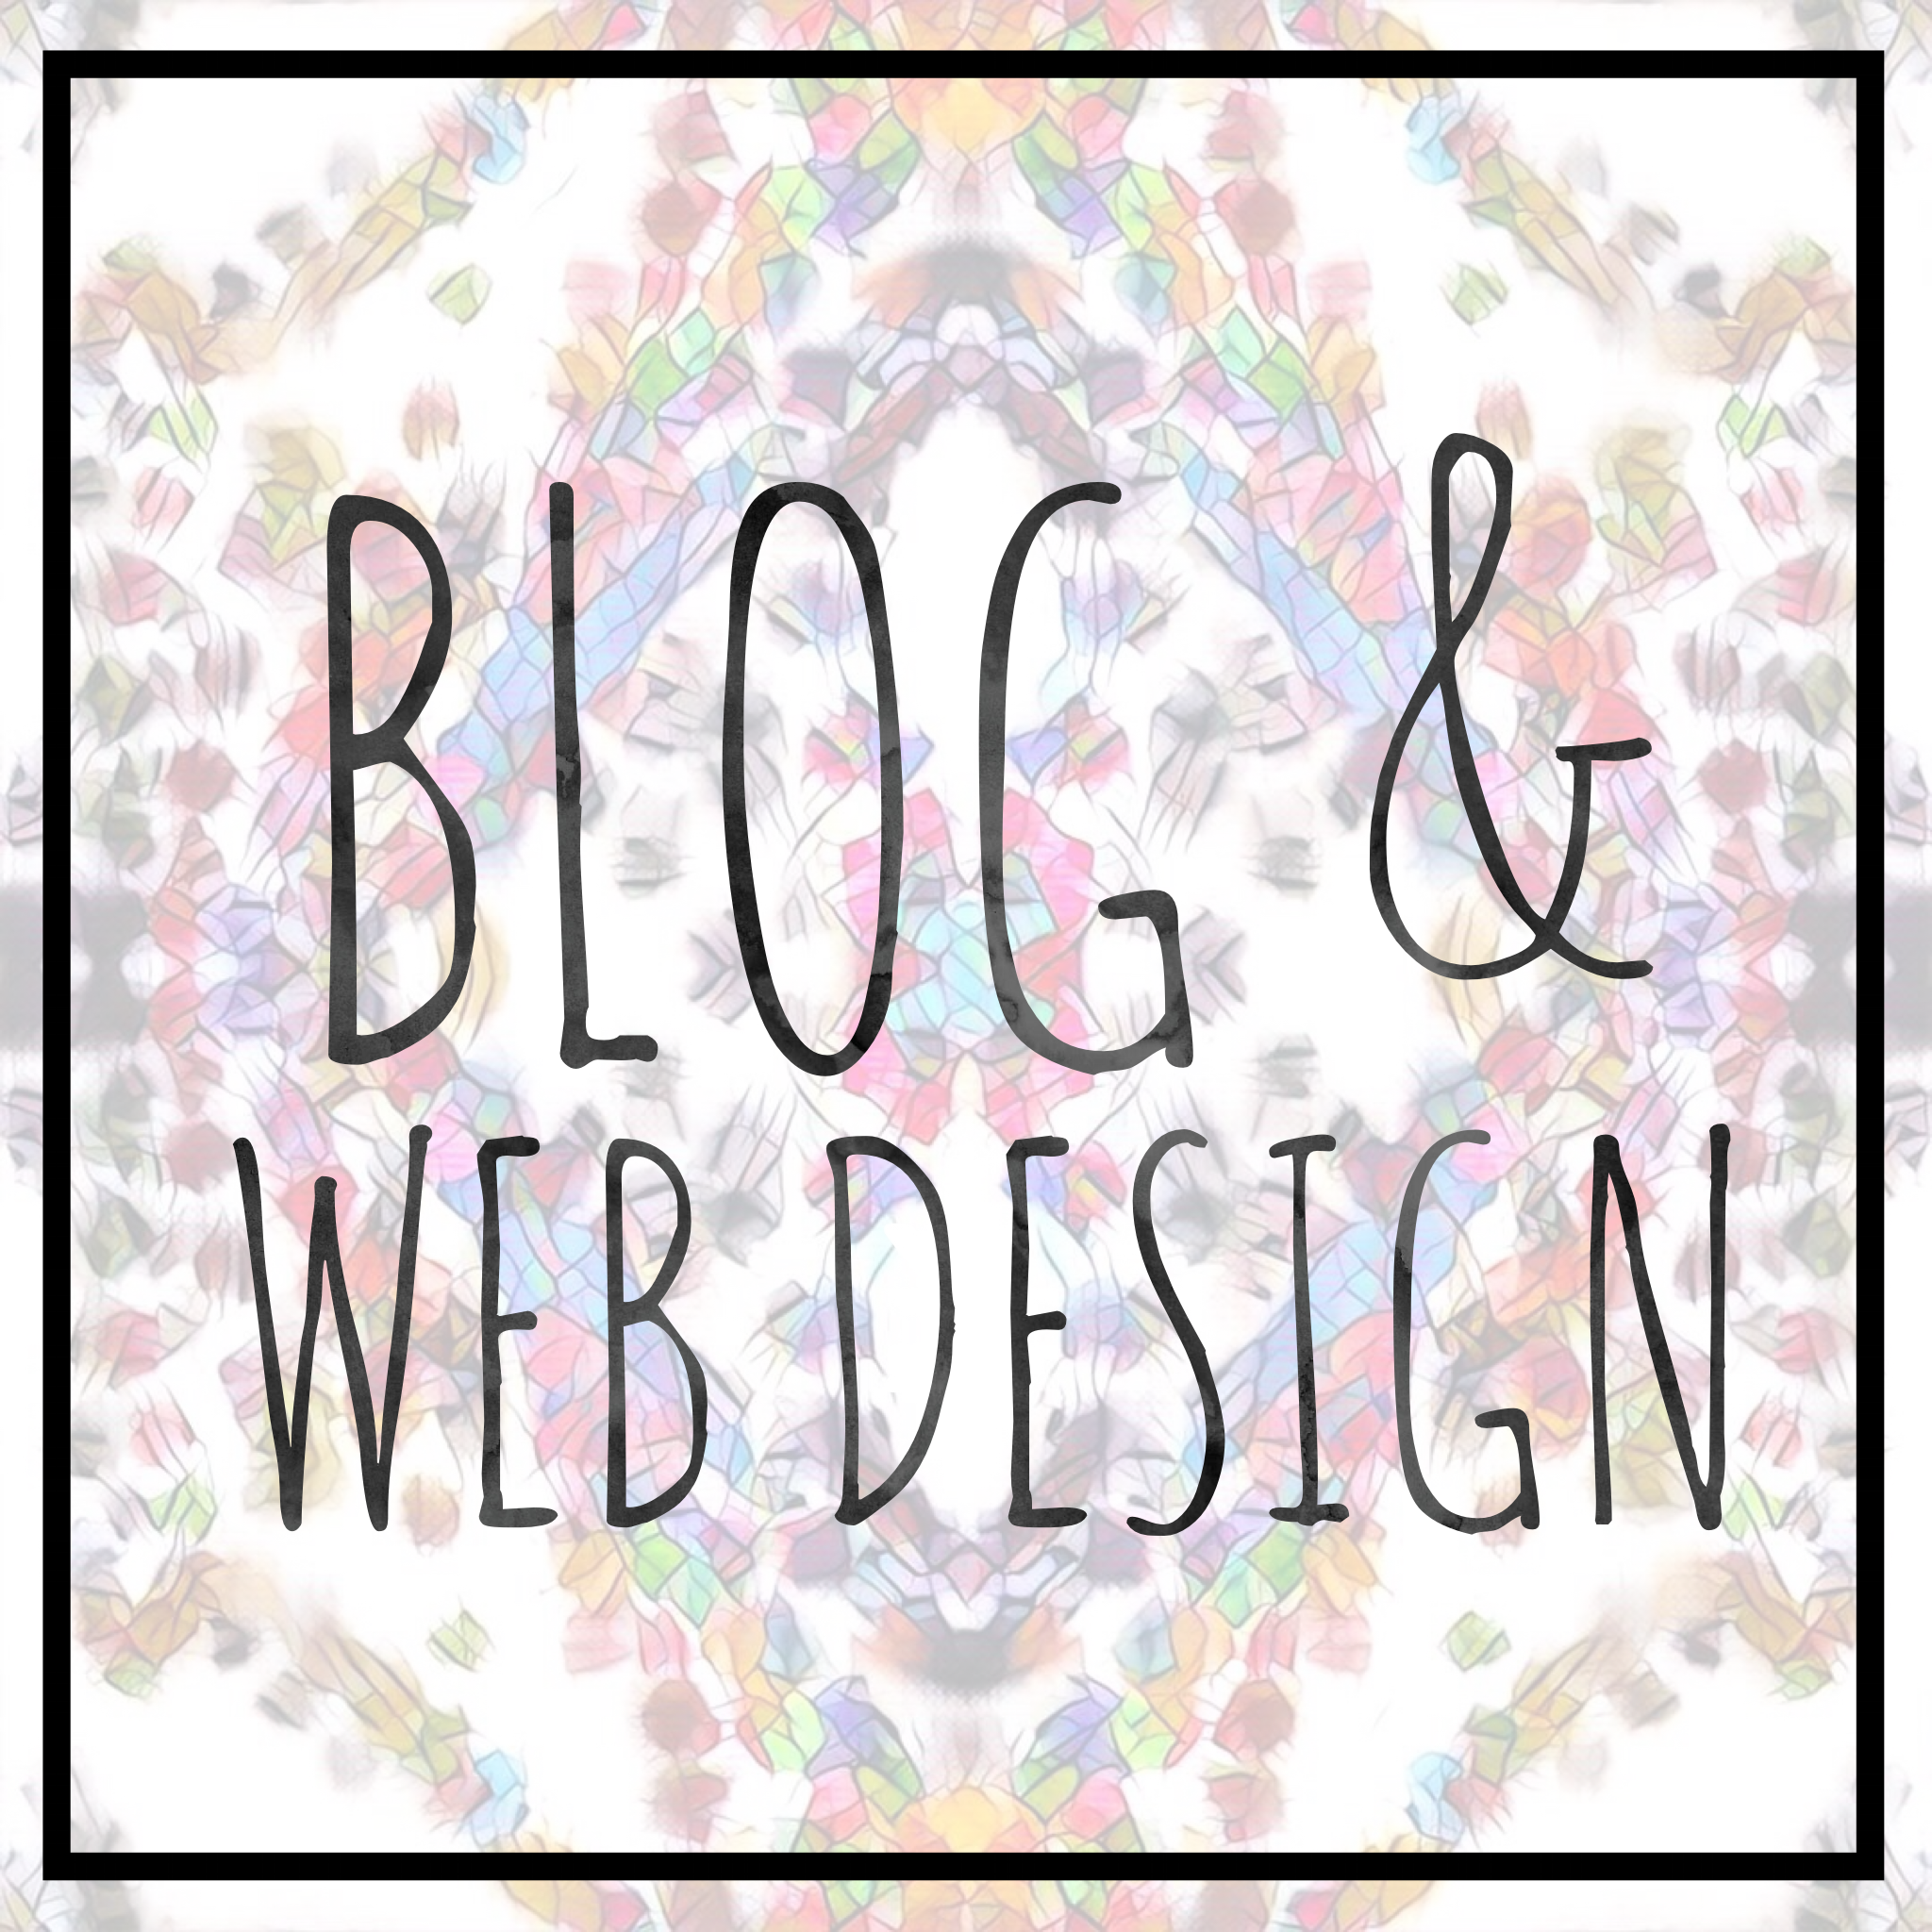 Blog and Web Design by Dr. Liz Musil